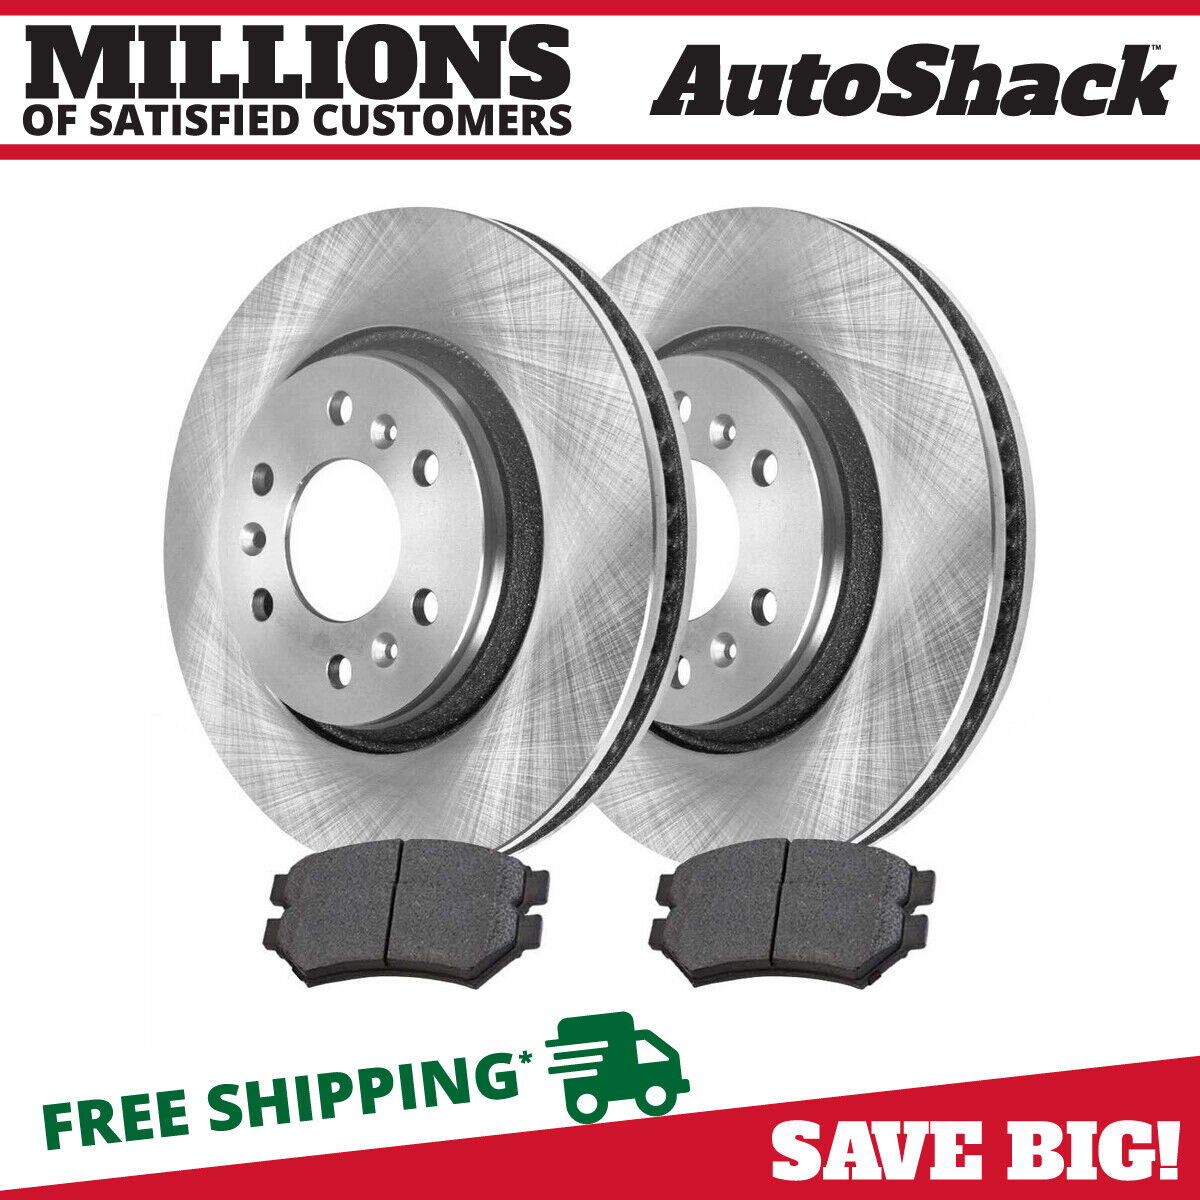 Front Brake Rotors & Pads for Chevy Uplander Buick Terraza Saturn Relay 3.9L V6